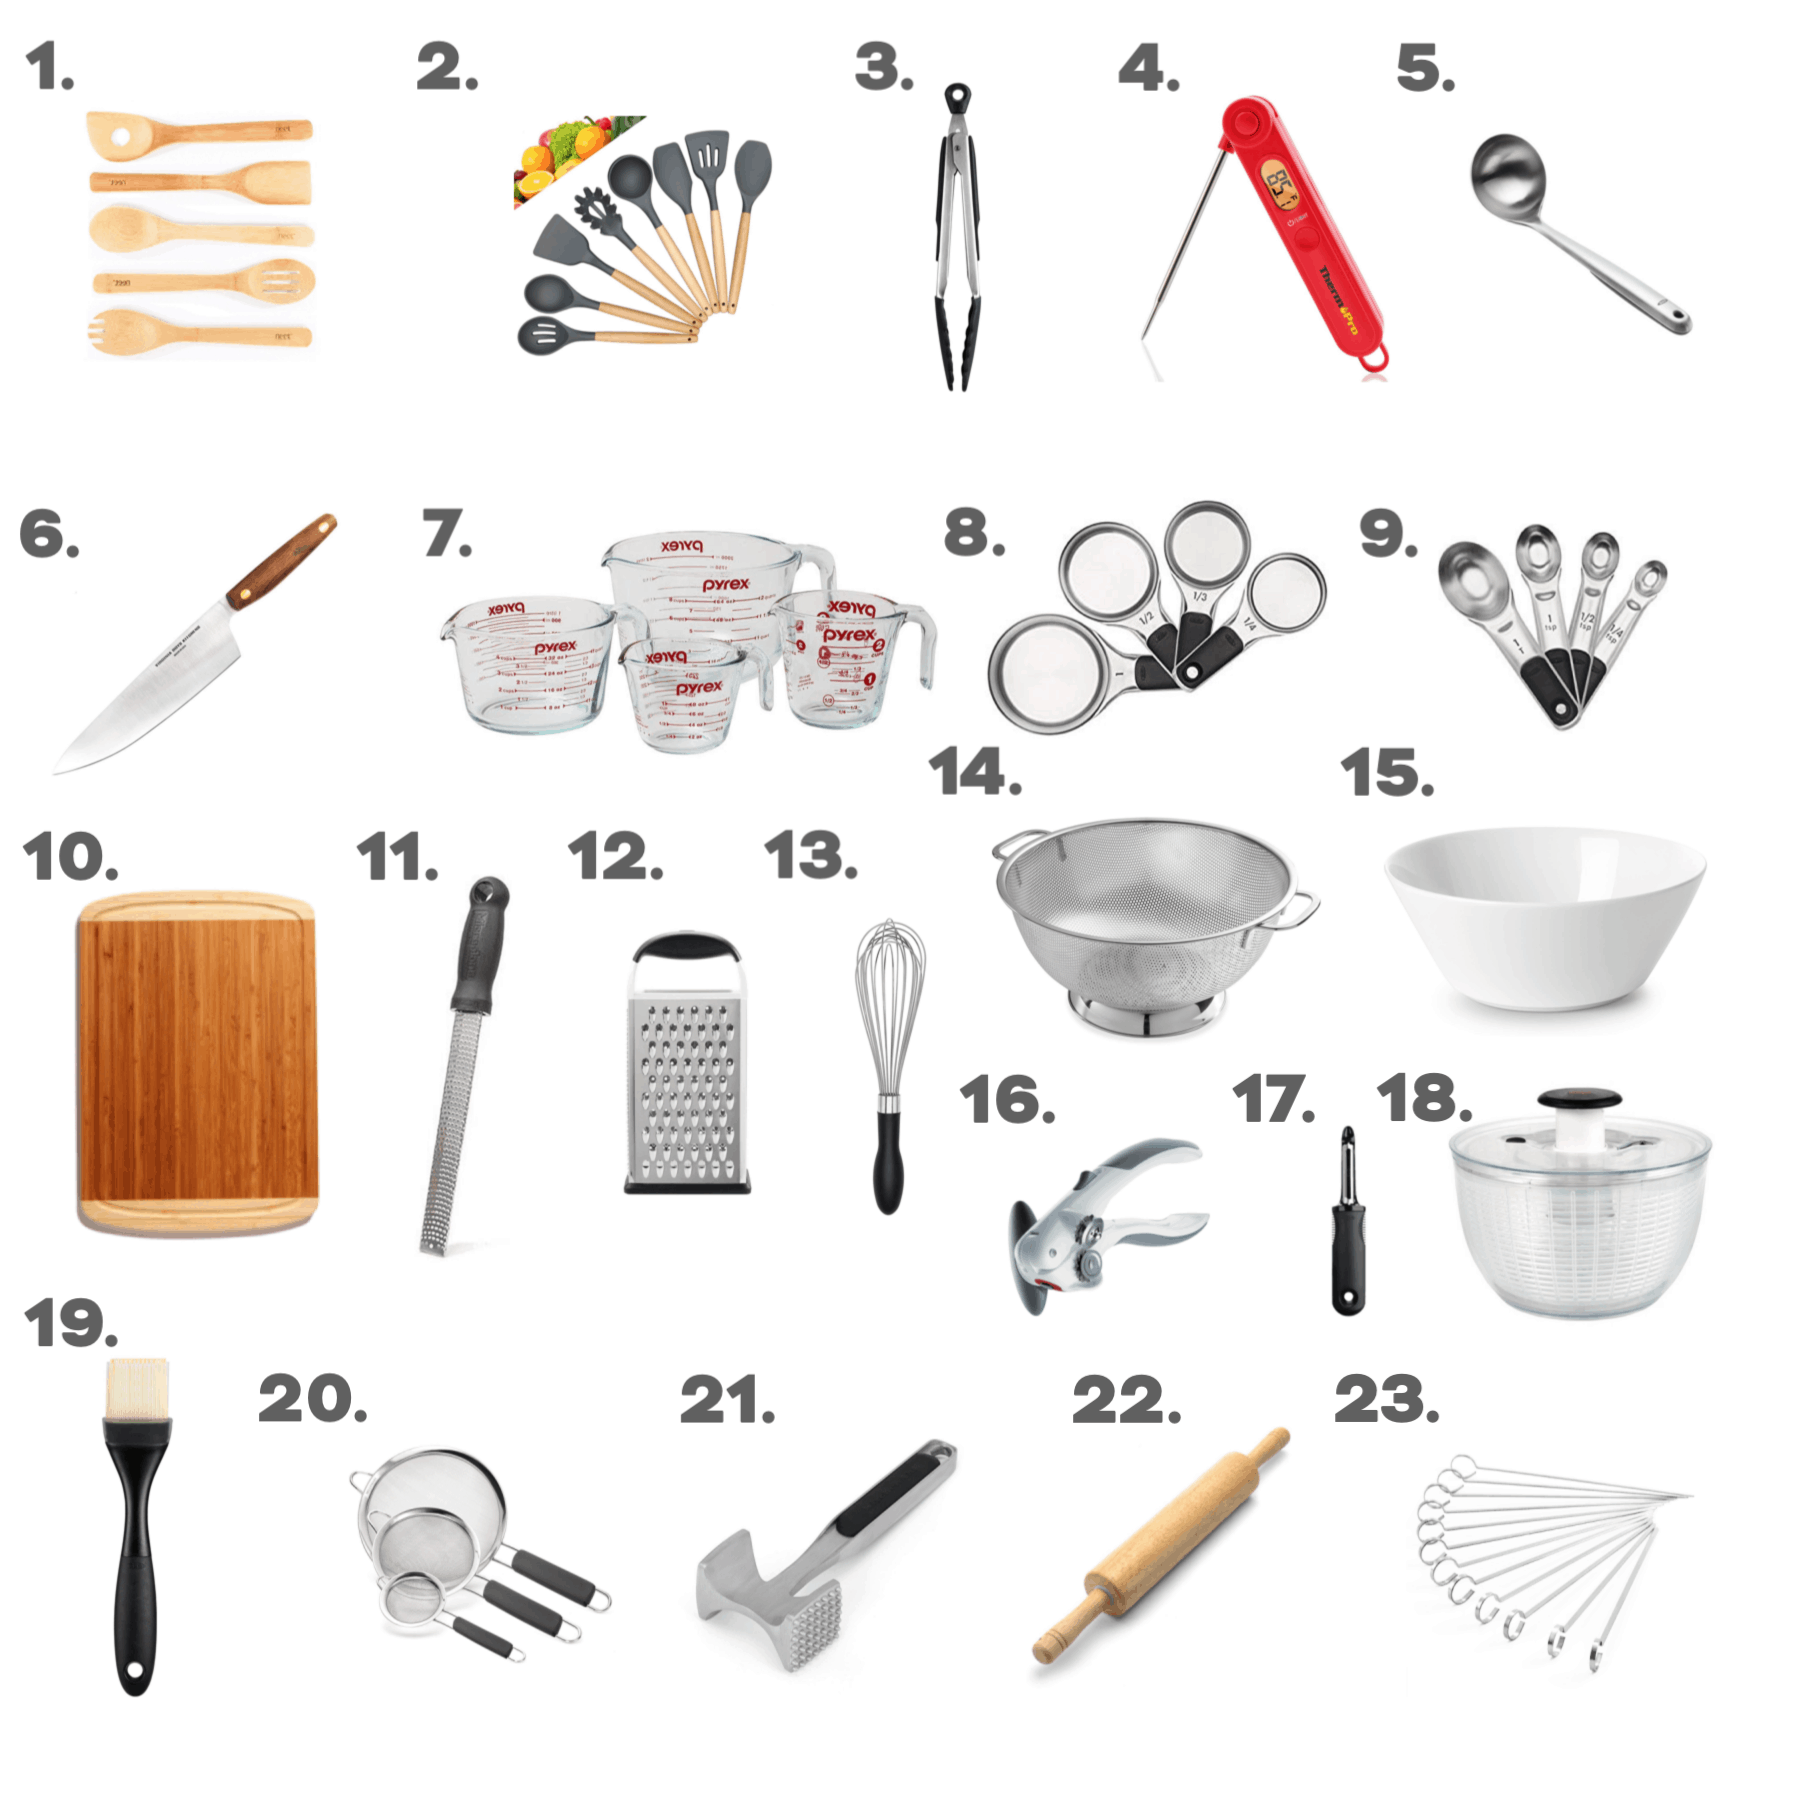 Favorite Non-Toxic Kitchen Utensils and Small Gadgets ...